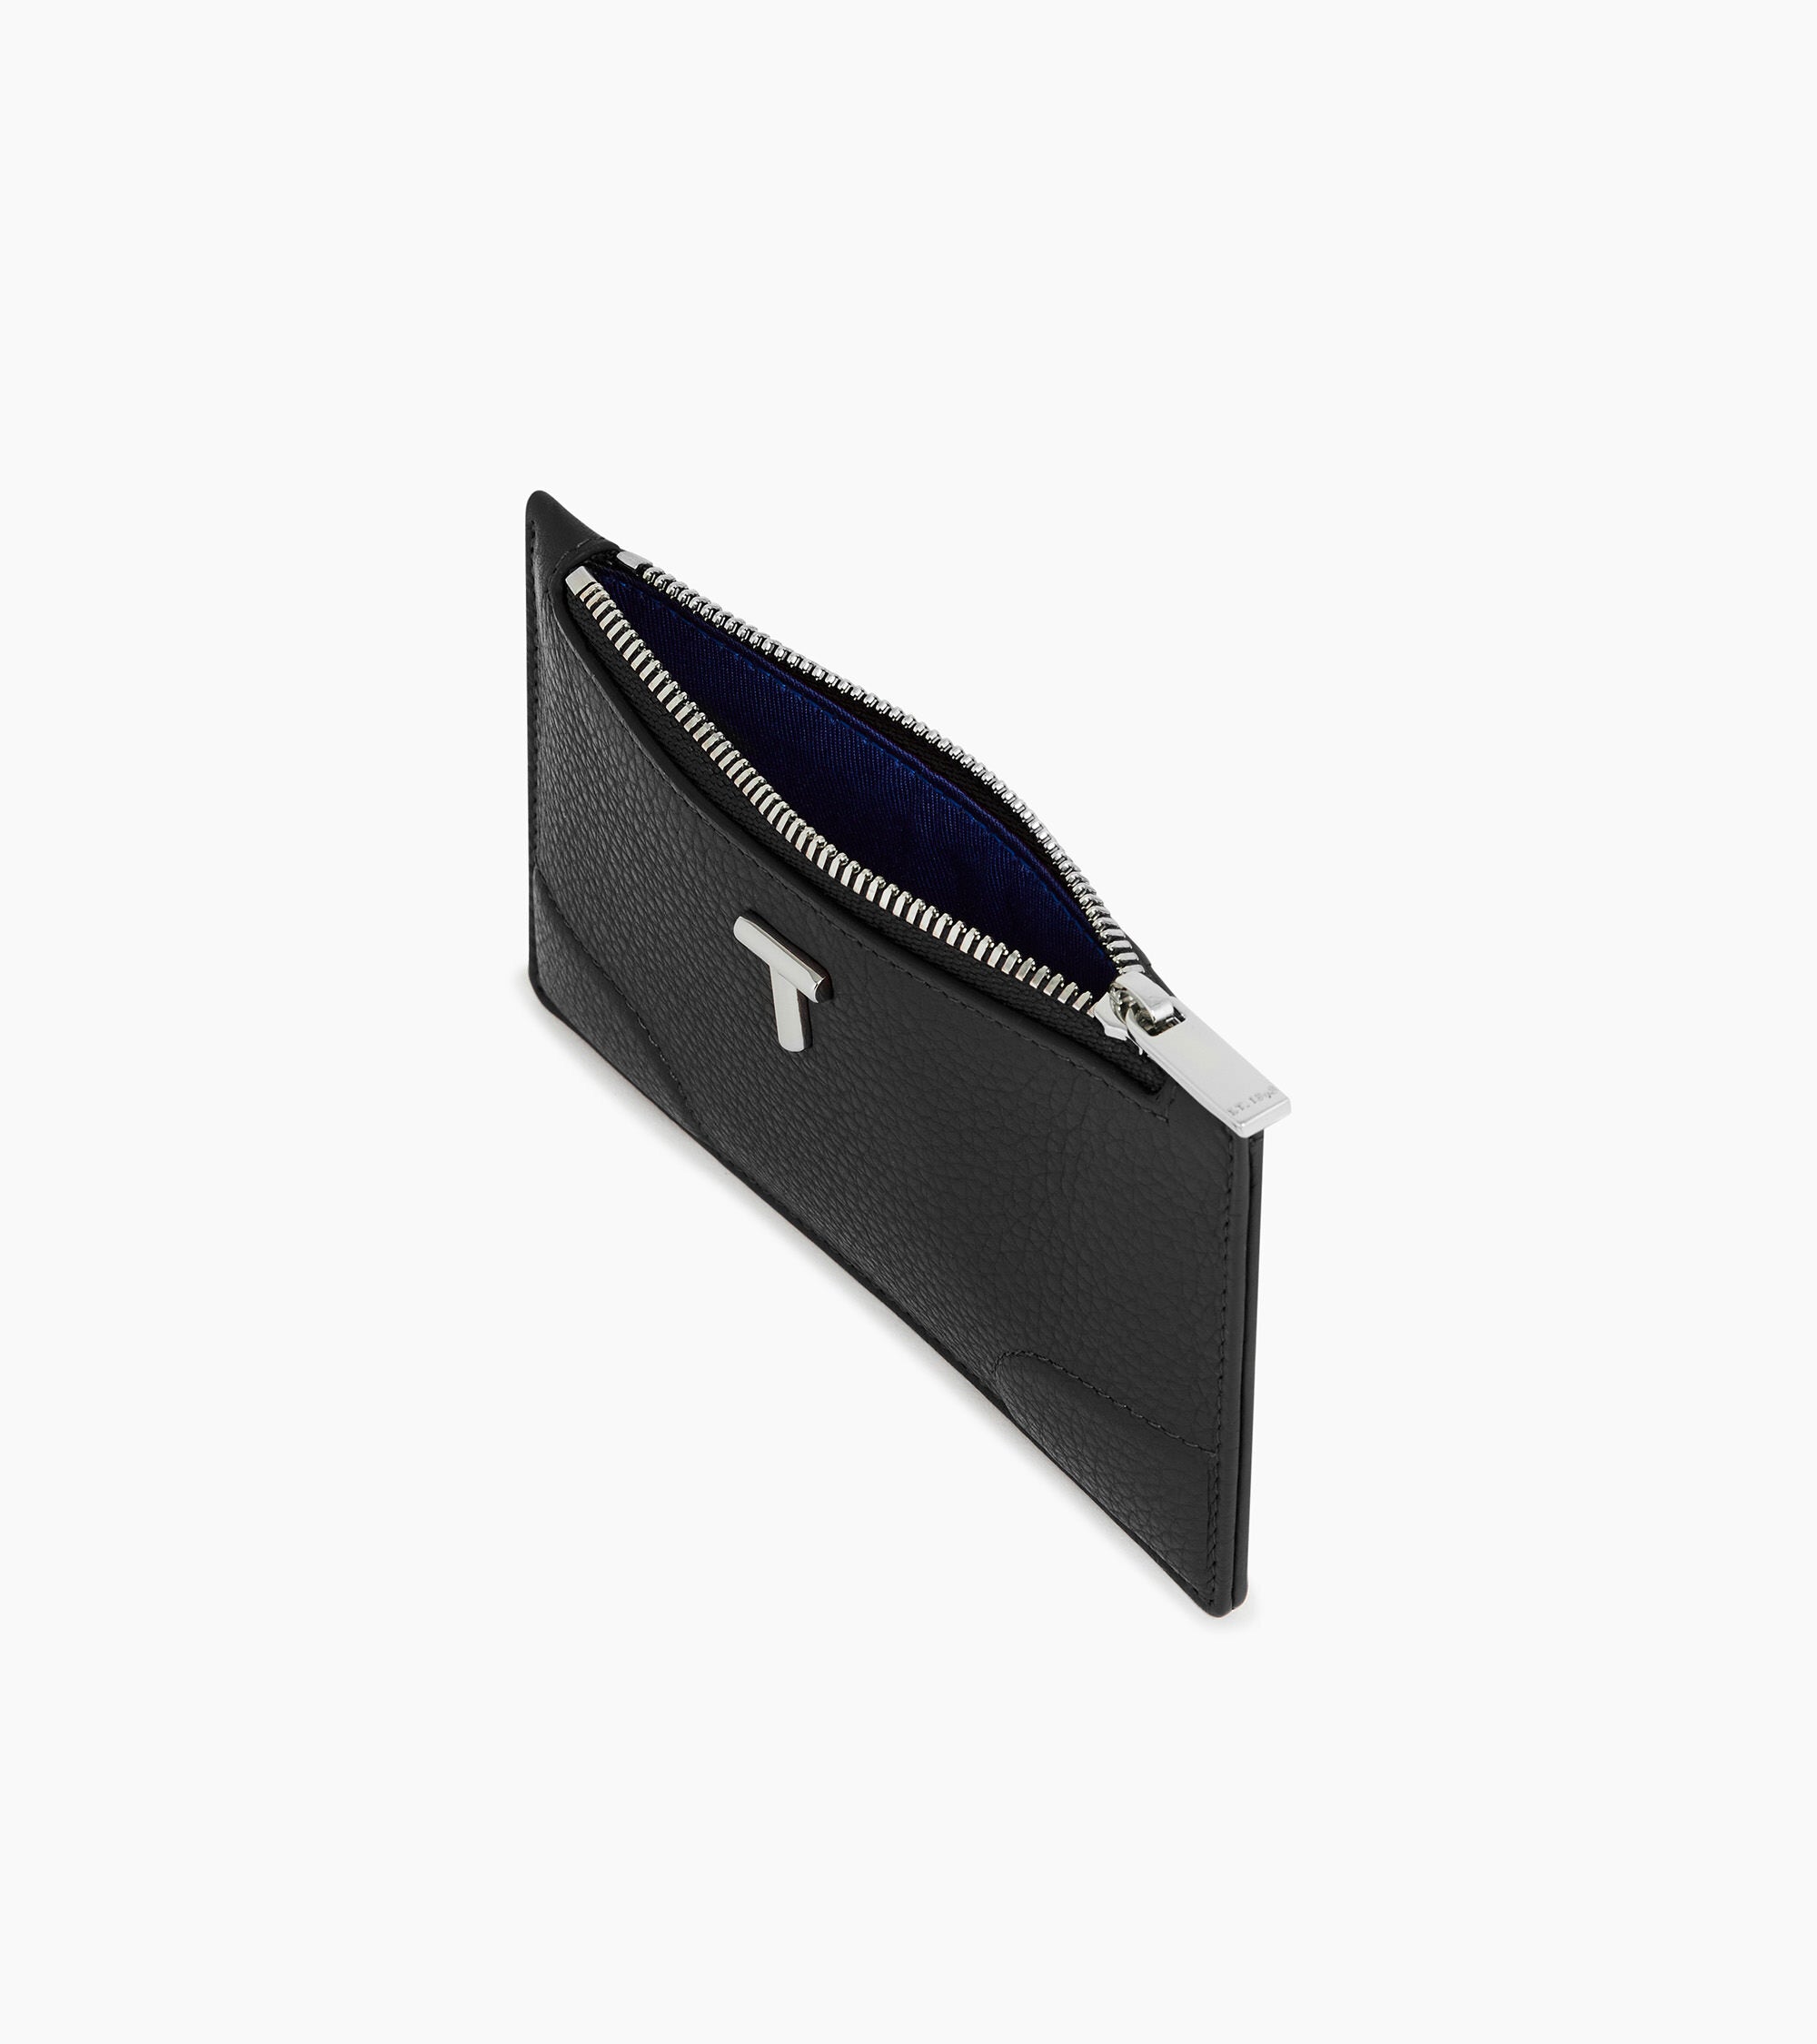 Romy zipped card case in pebbled leather